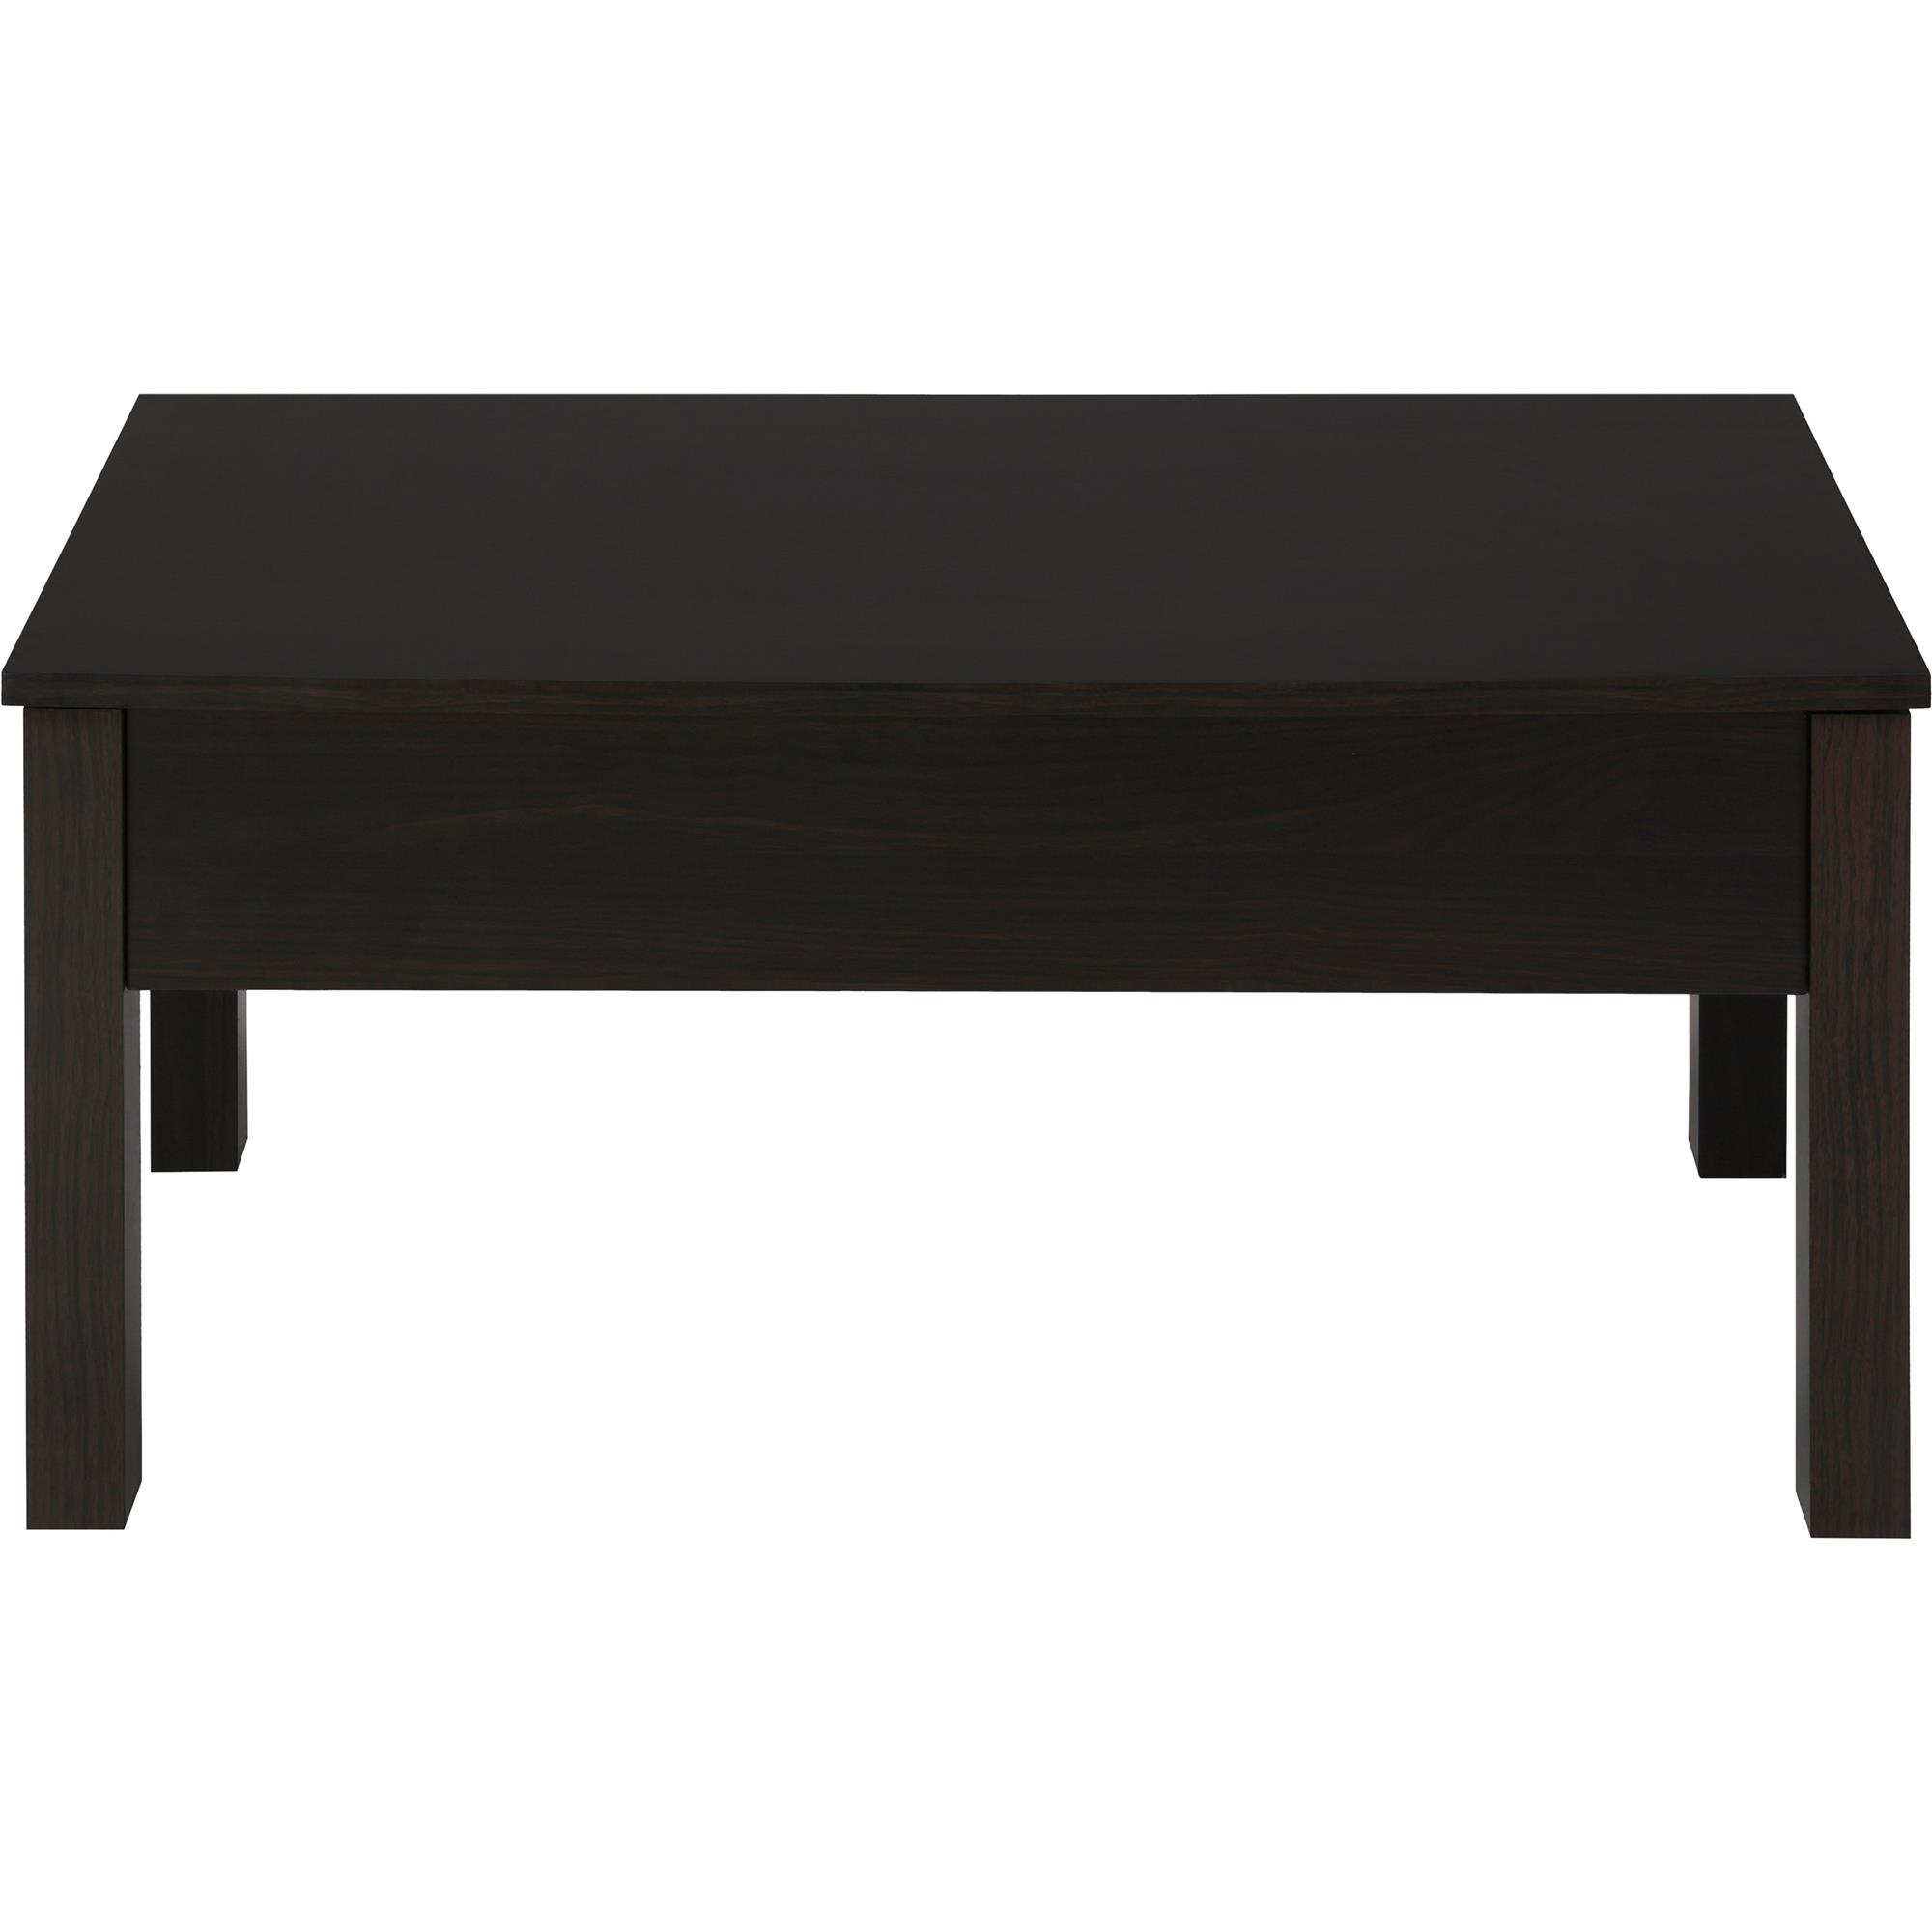 Mainstays Lift Top Coffee Table, Espresso - image 3 of 14